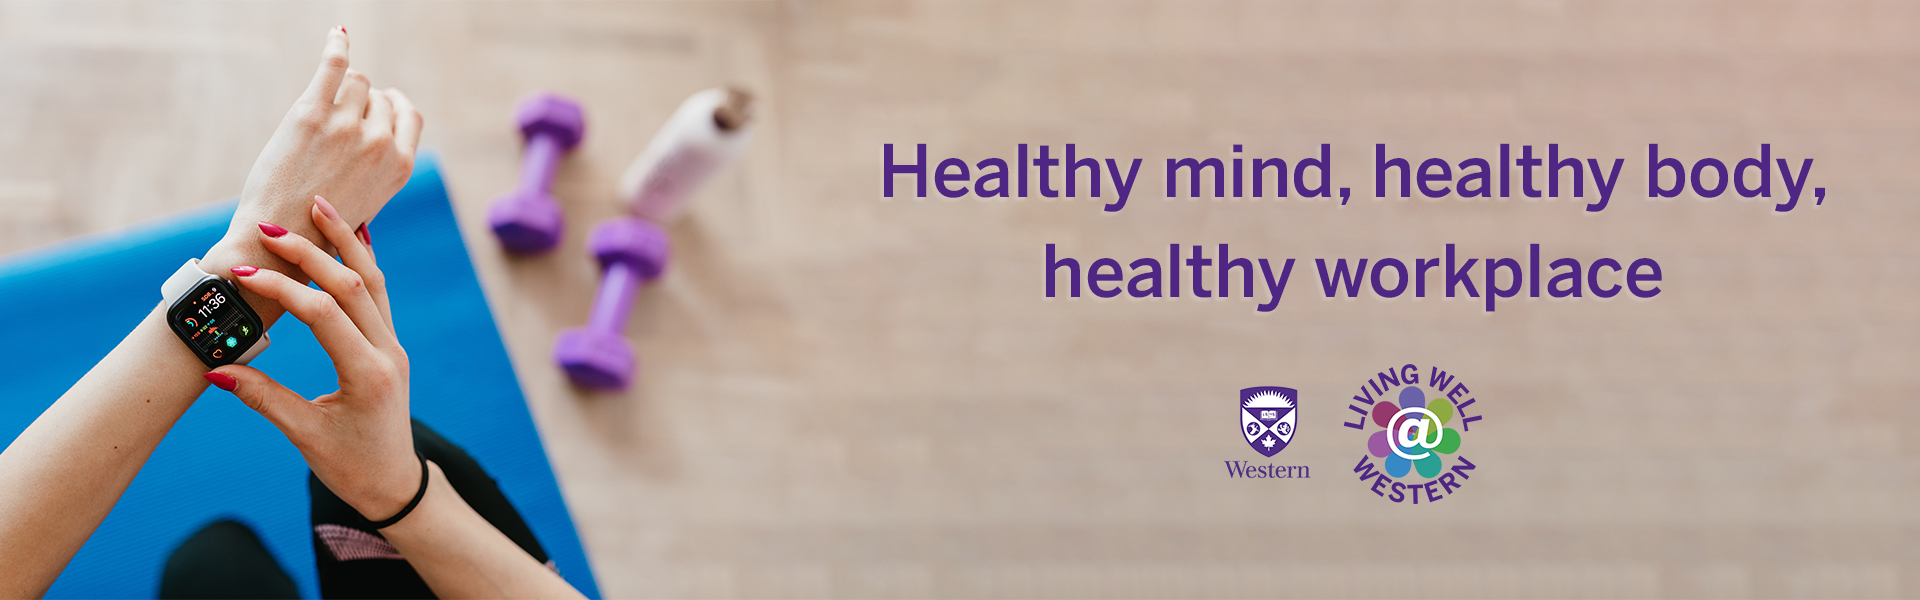 Healthy mind, healthy body, healthy workplace - Living Well